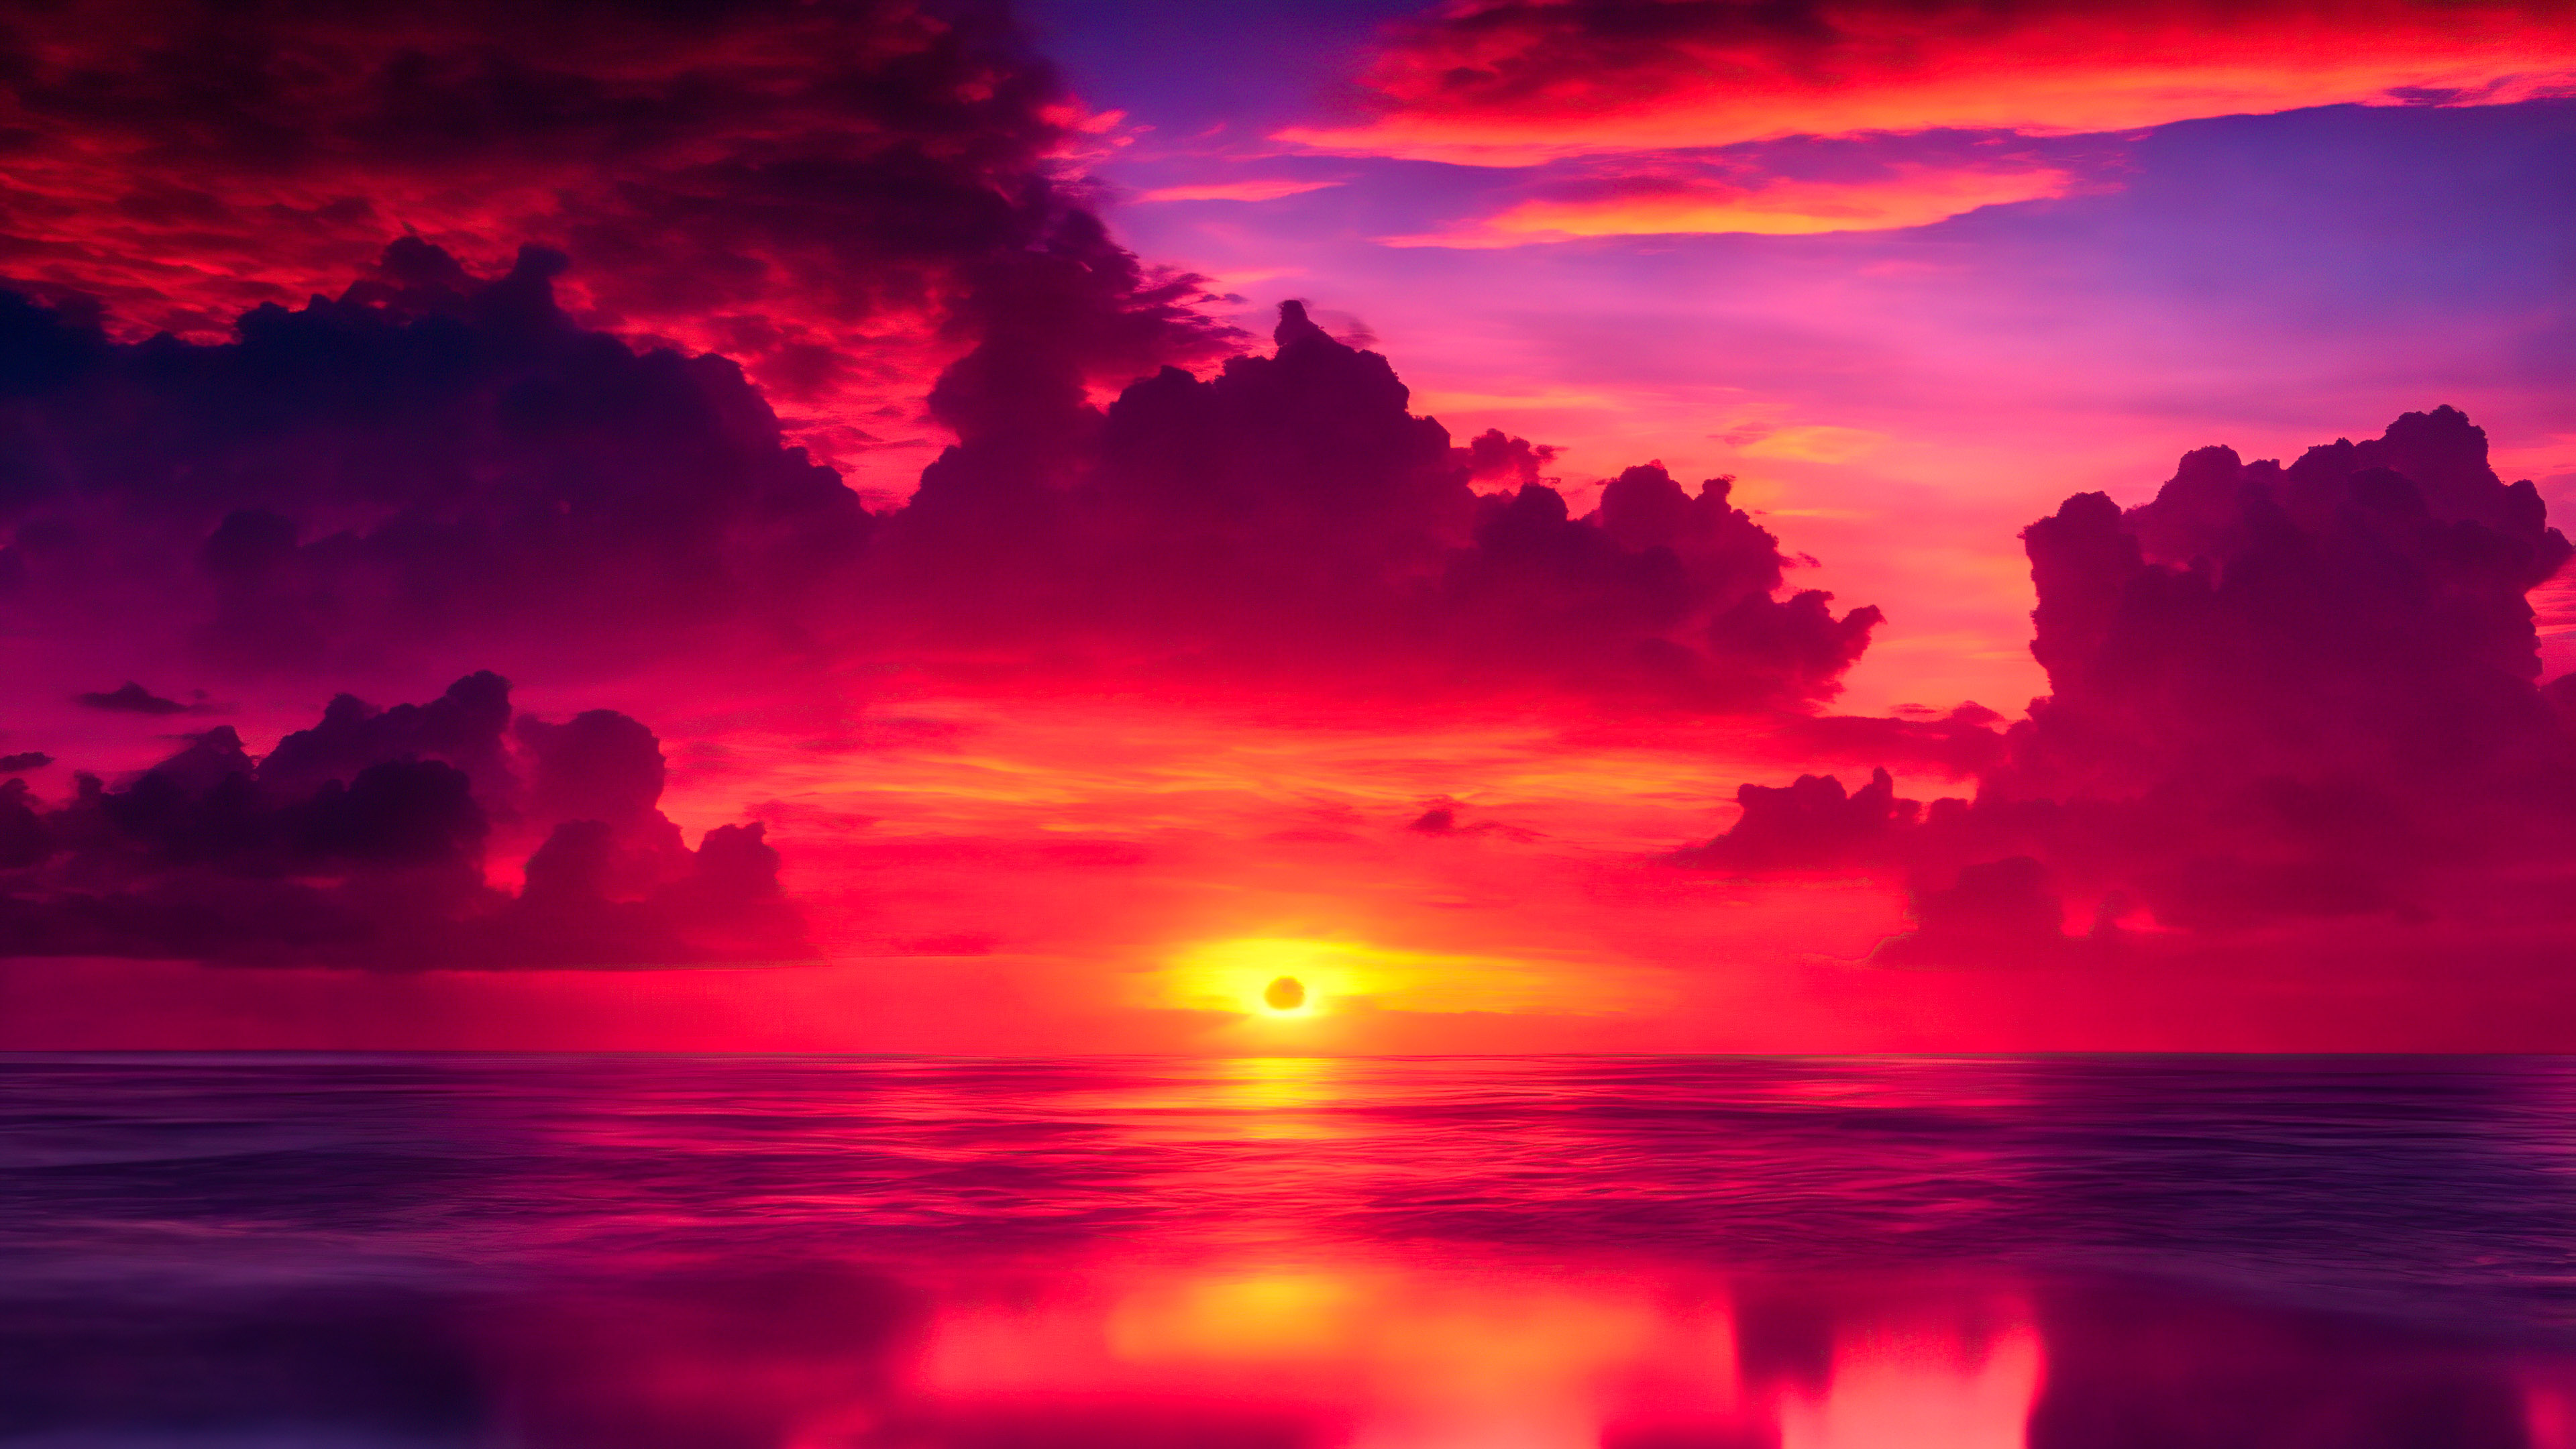 Be captivated by a mesmerizing sunset over an expansive ocean, with fiery hues of orange and pink, in our 4K nature wallpaper collection for your PC.